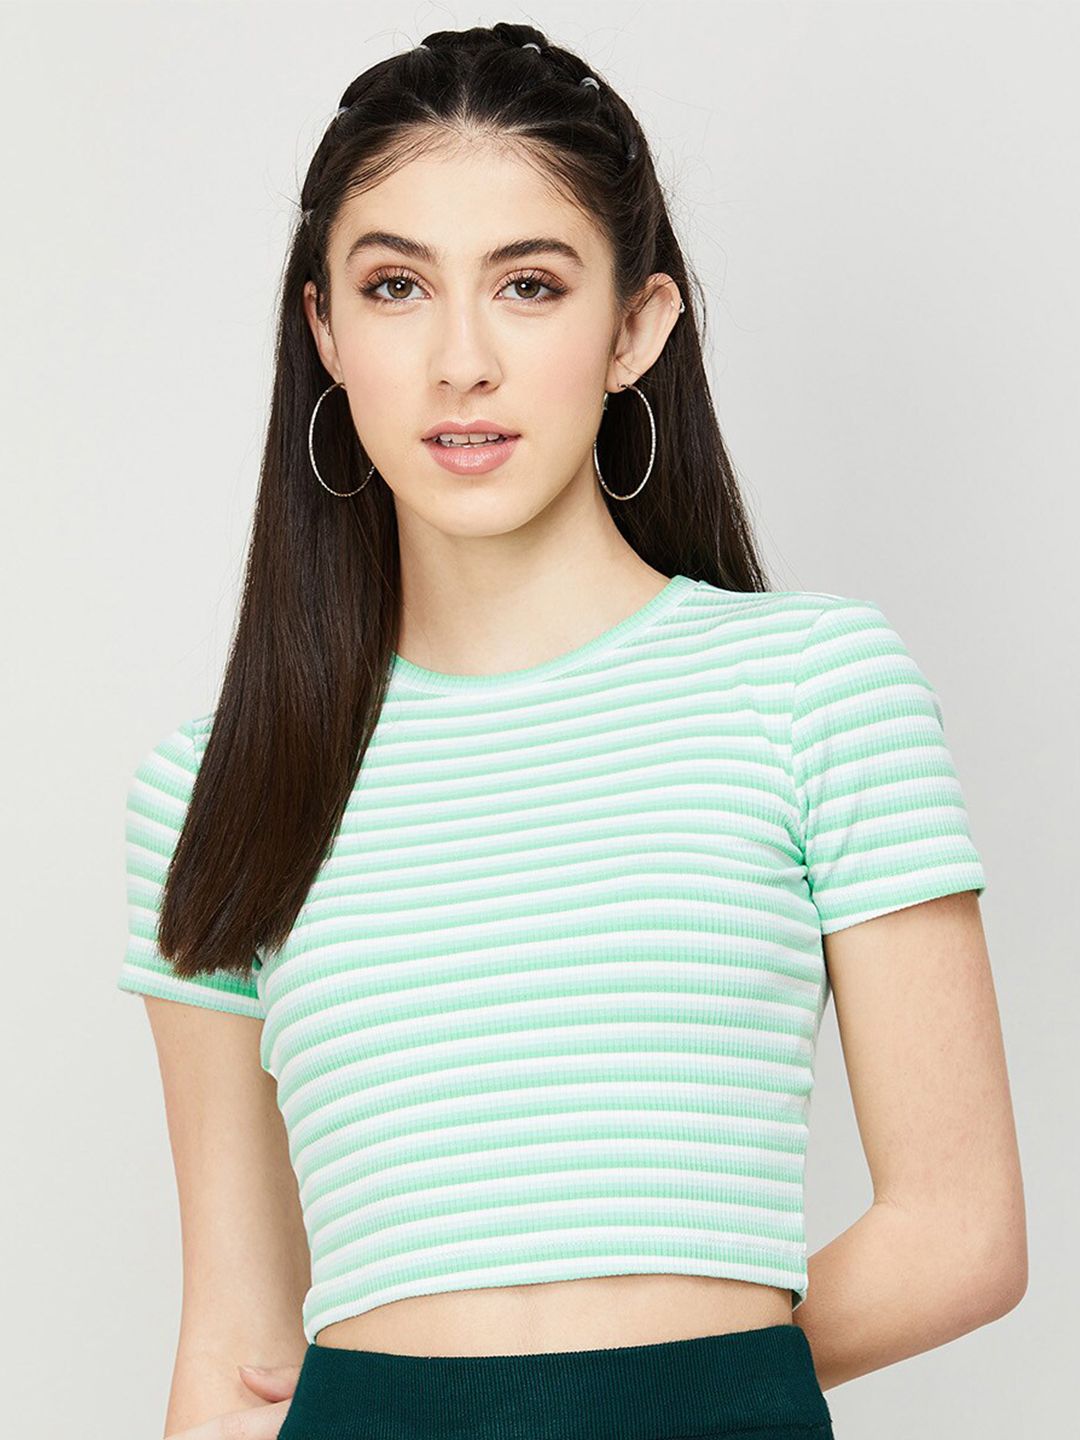 Ginger by Lifestyle Sea Green Striped Crop Top Price in India